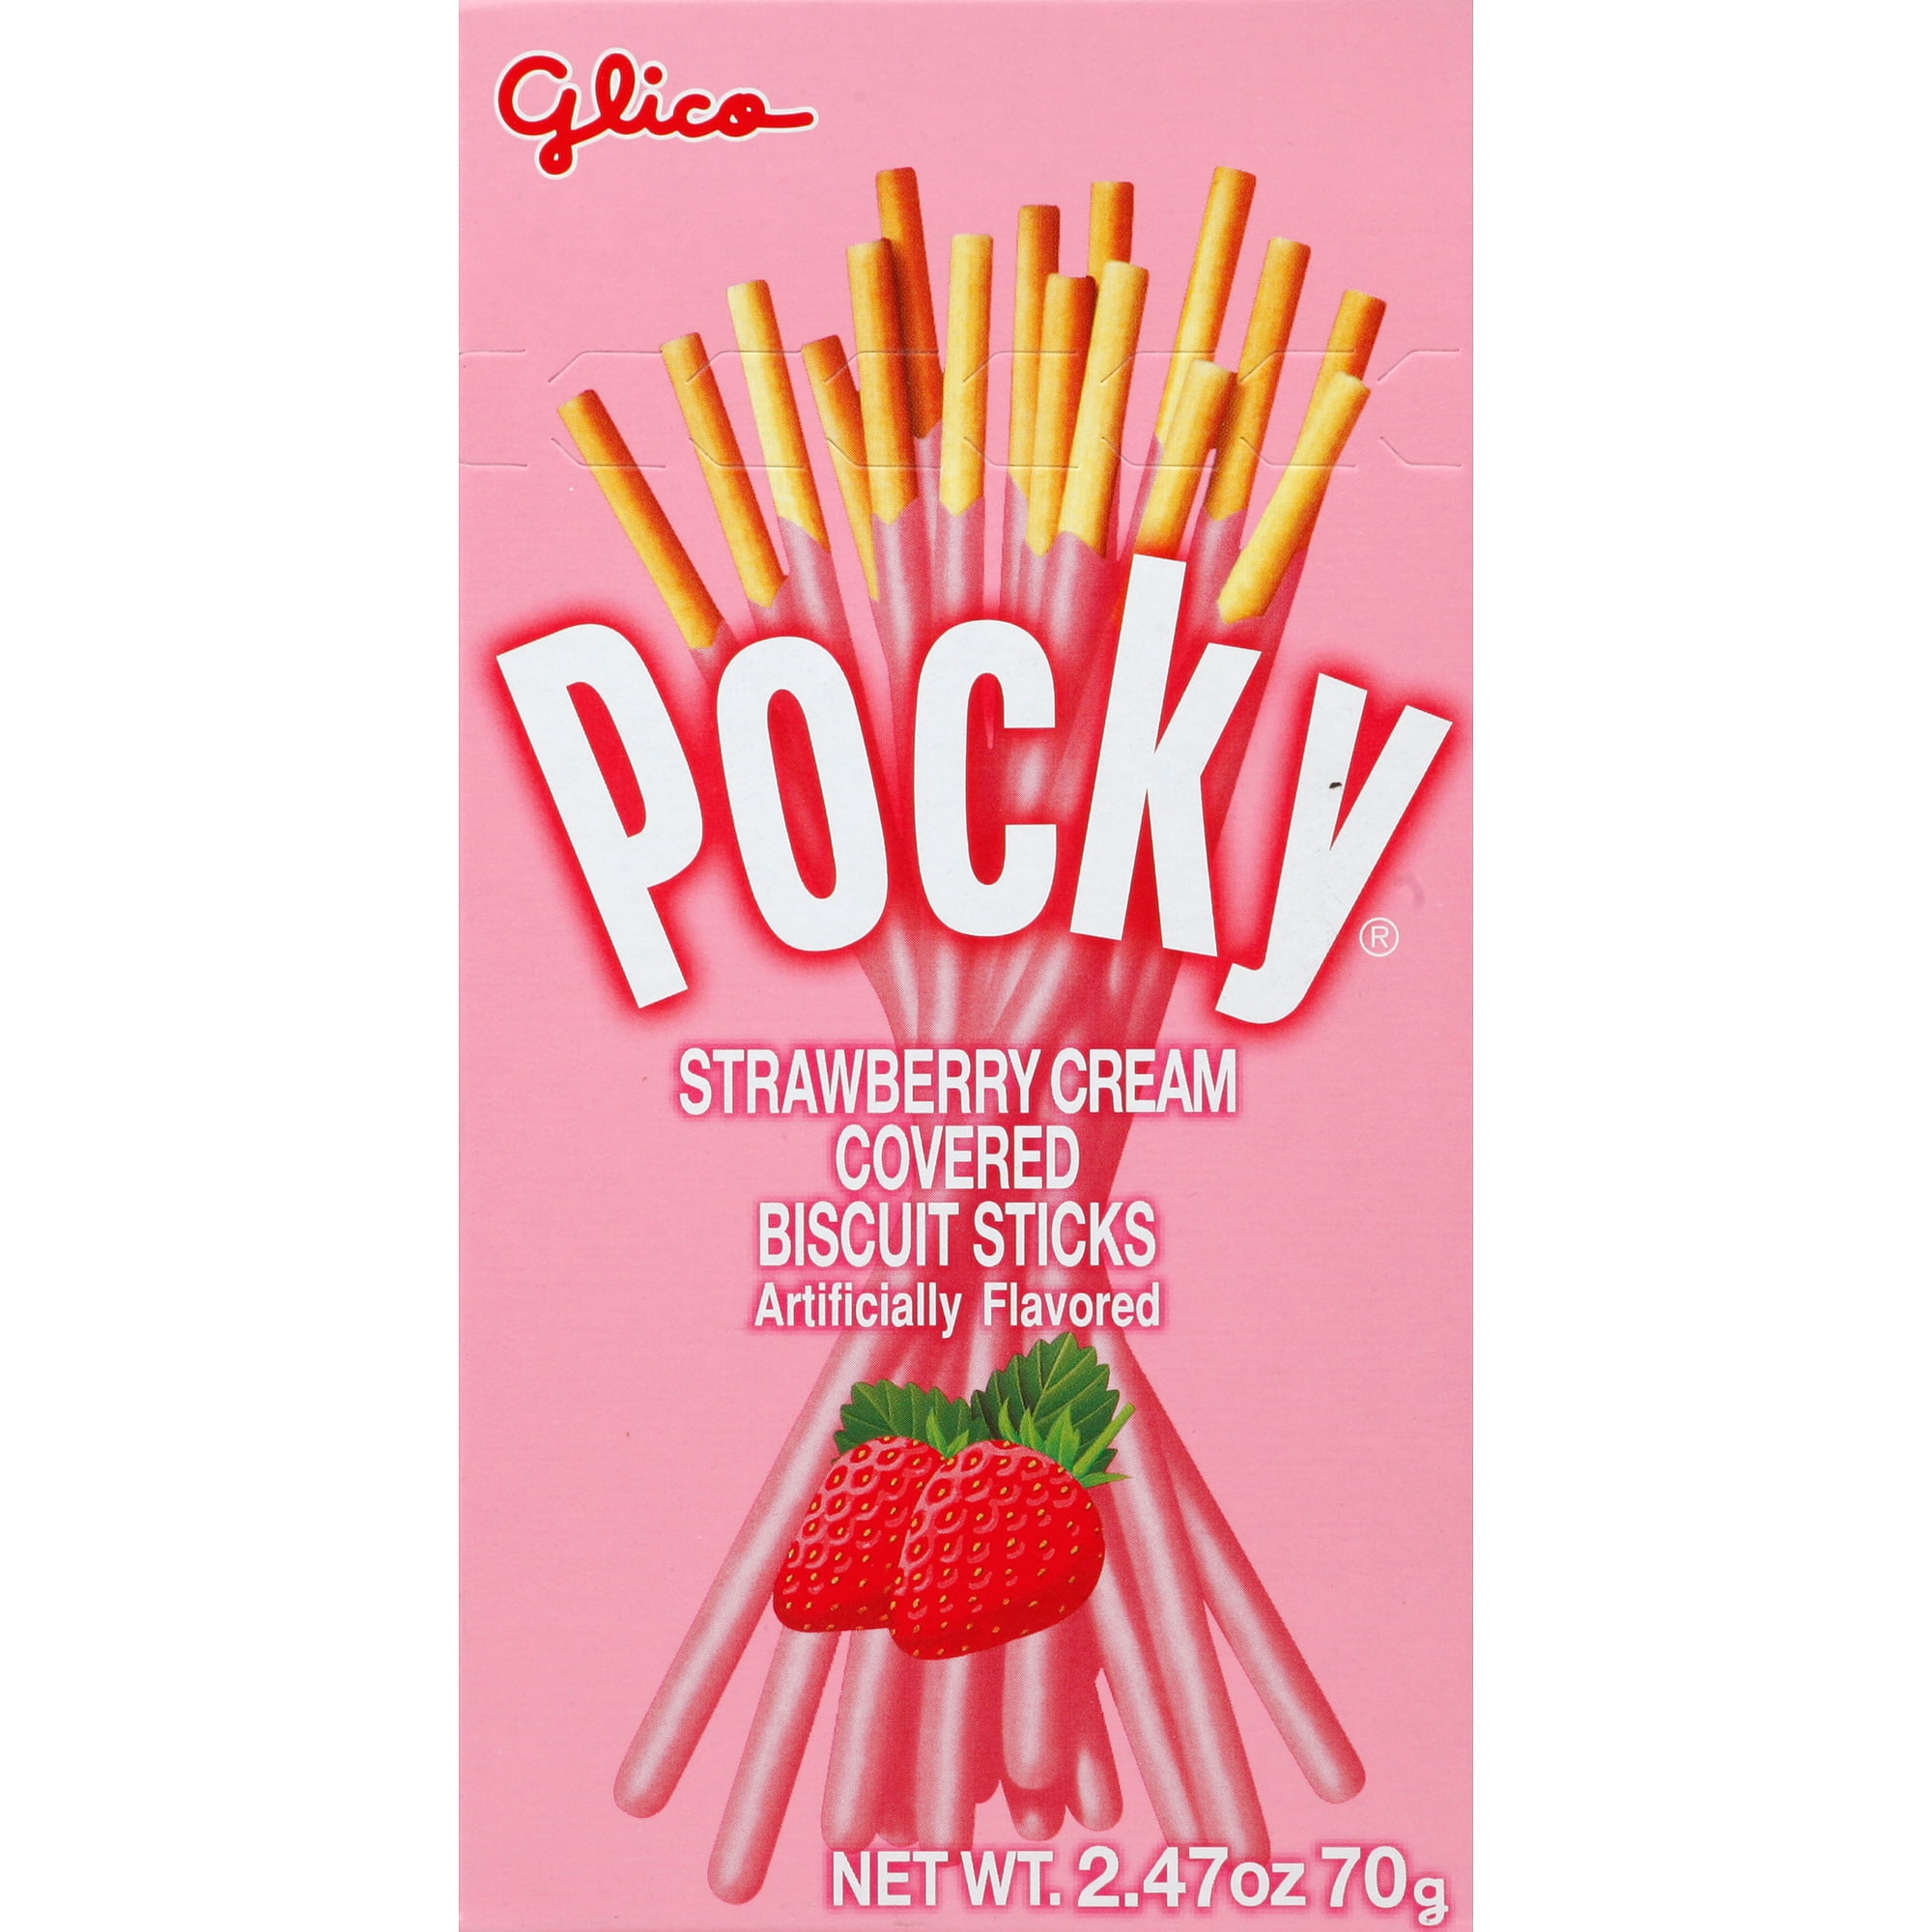 3.81 oz Glico Pocky 9 Individual Bags Strawberry Cream Covered Biscuit Sticks